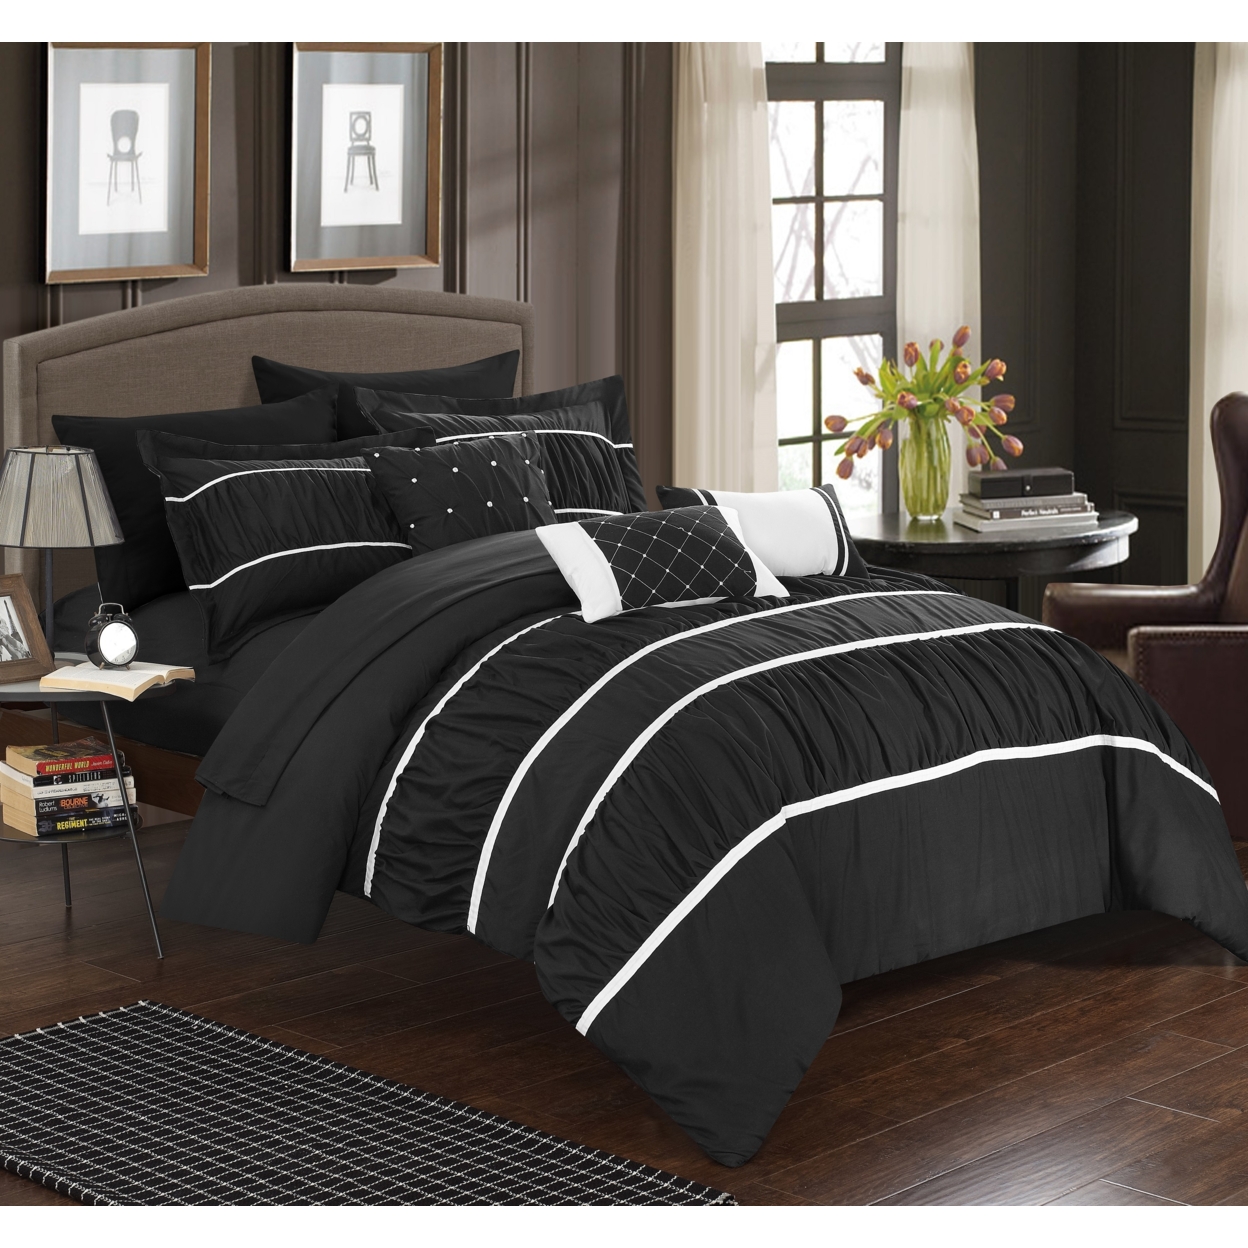 10-Piece Aero Pleated & Ruffled Bed In A Bag Comforter And Sheet Set - Black, King